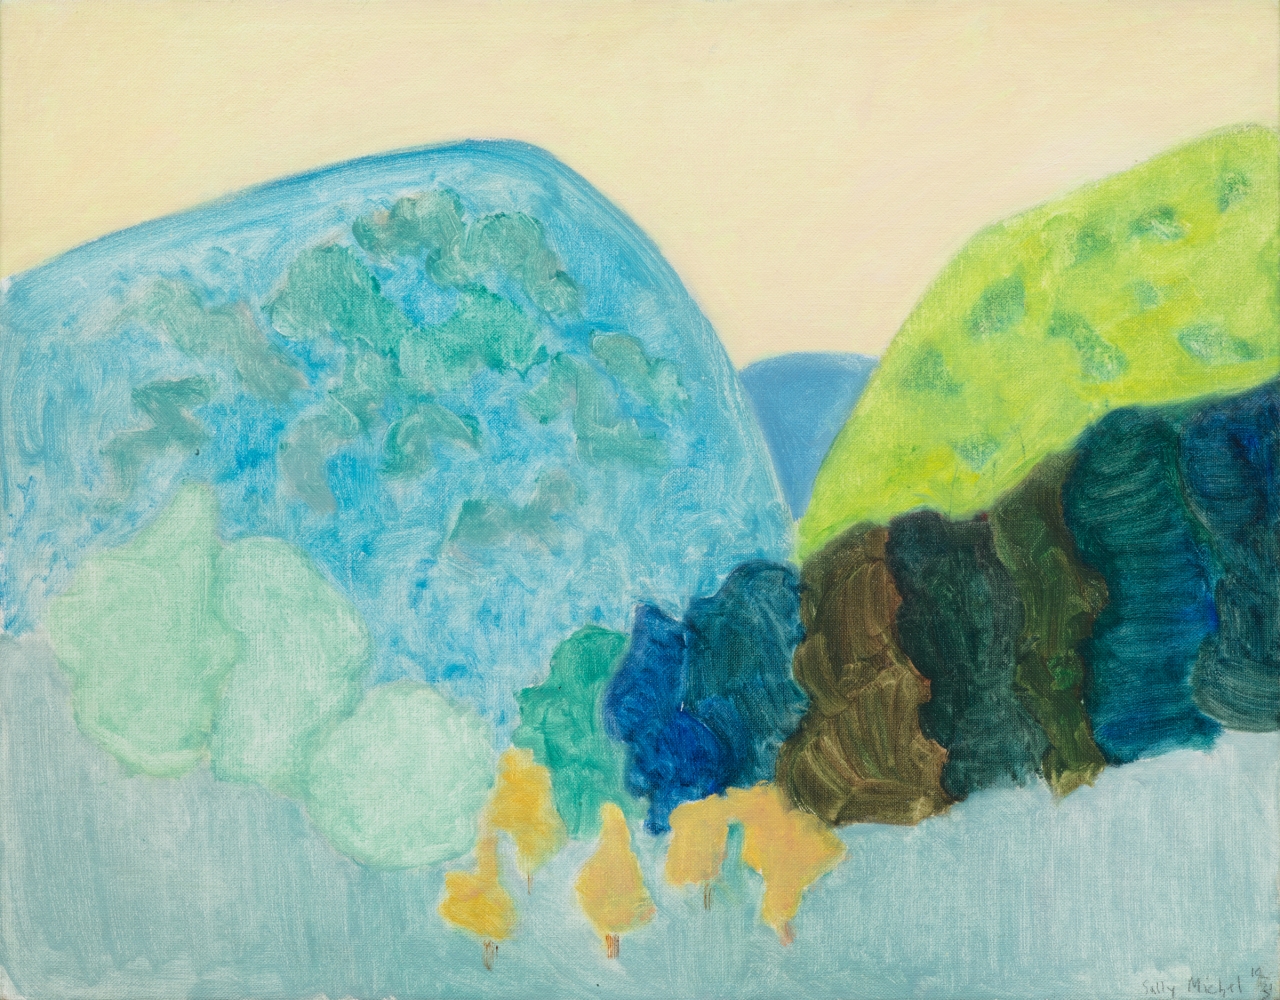 SALLY MICHEL

(1902 - 2003)

Through the Mountains

1982

Oil on board

22 x 28 inches

55.9 x 71.1cm